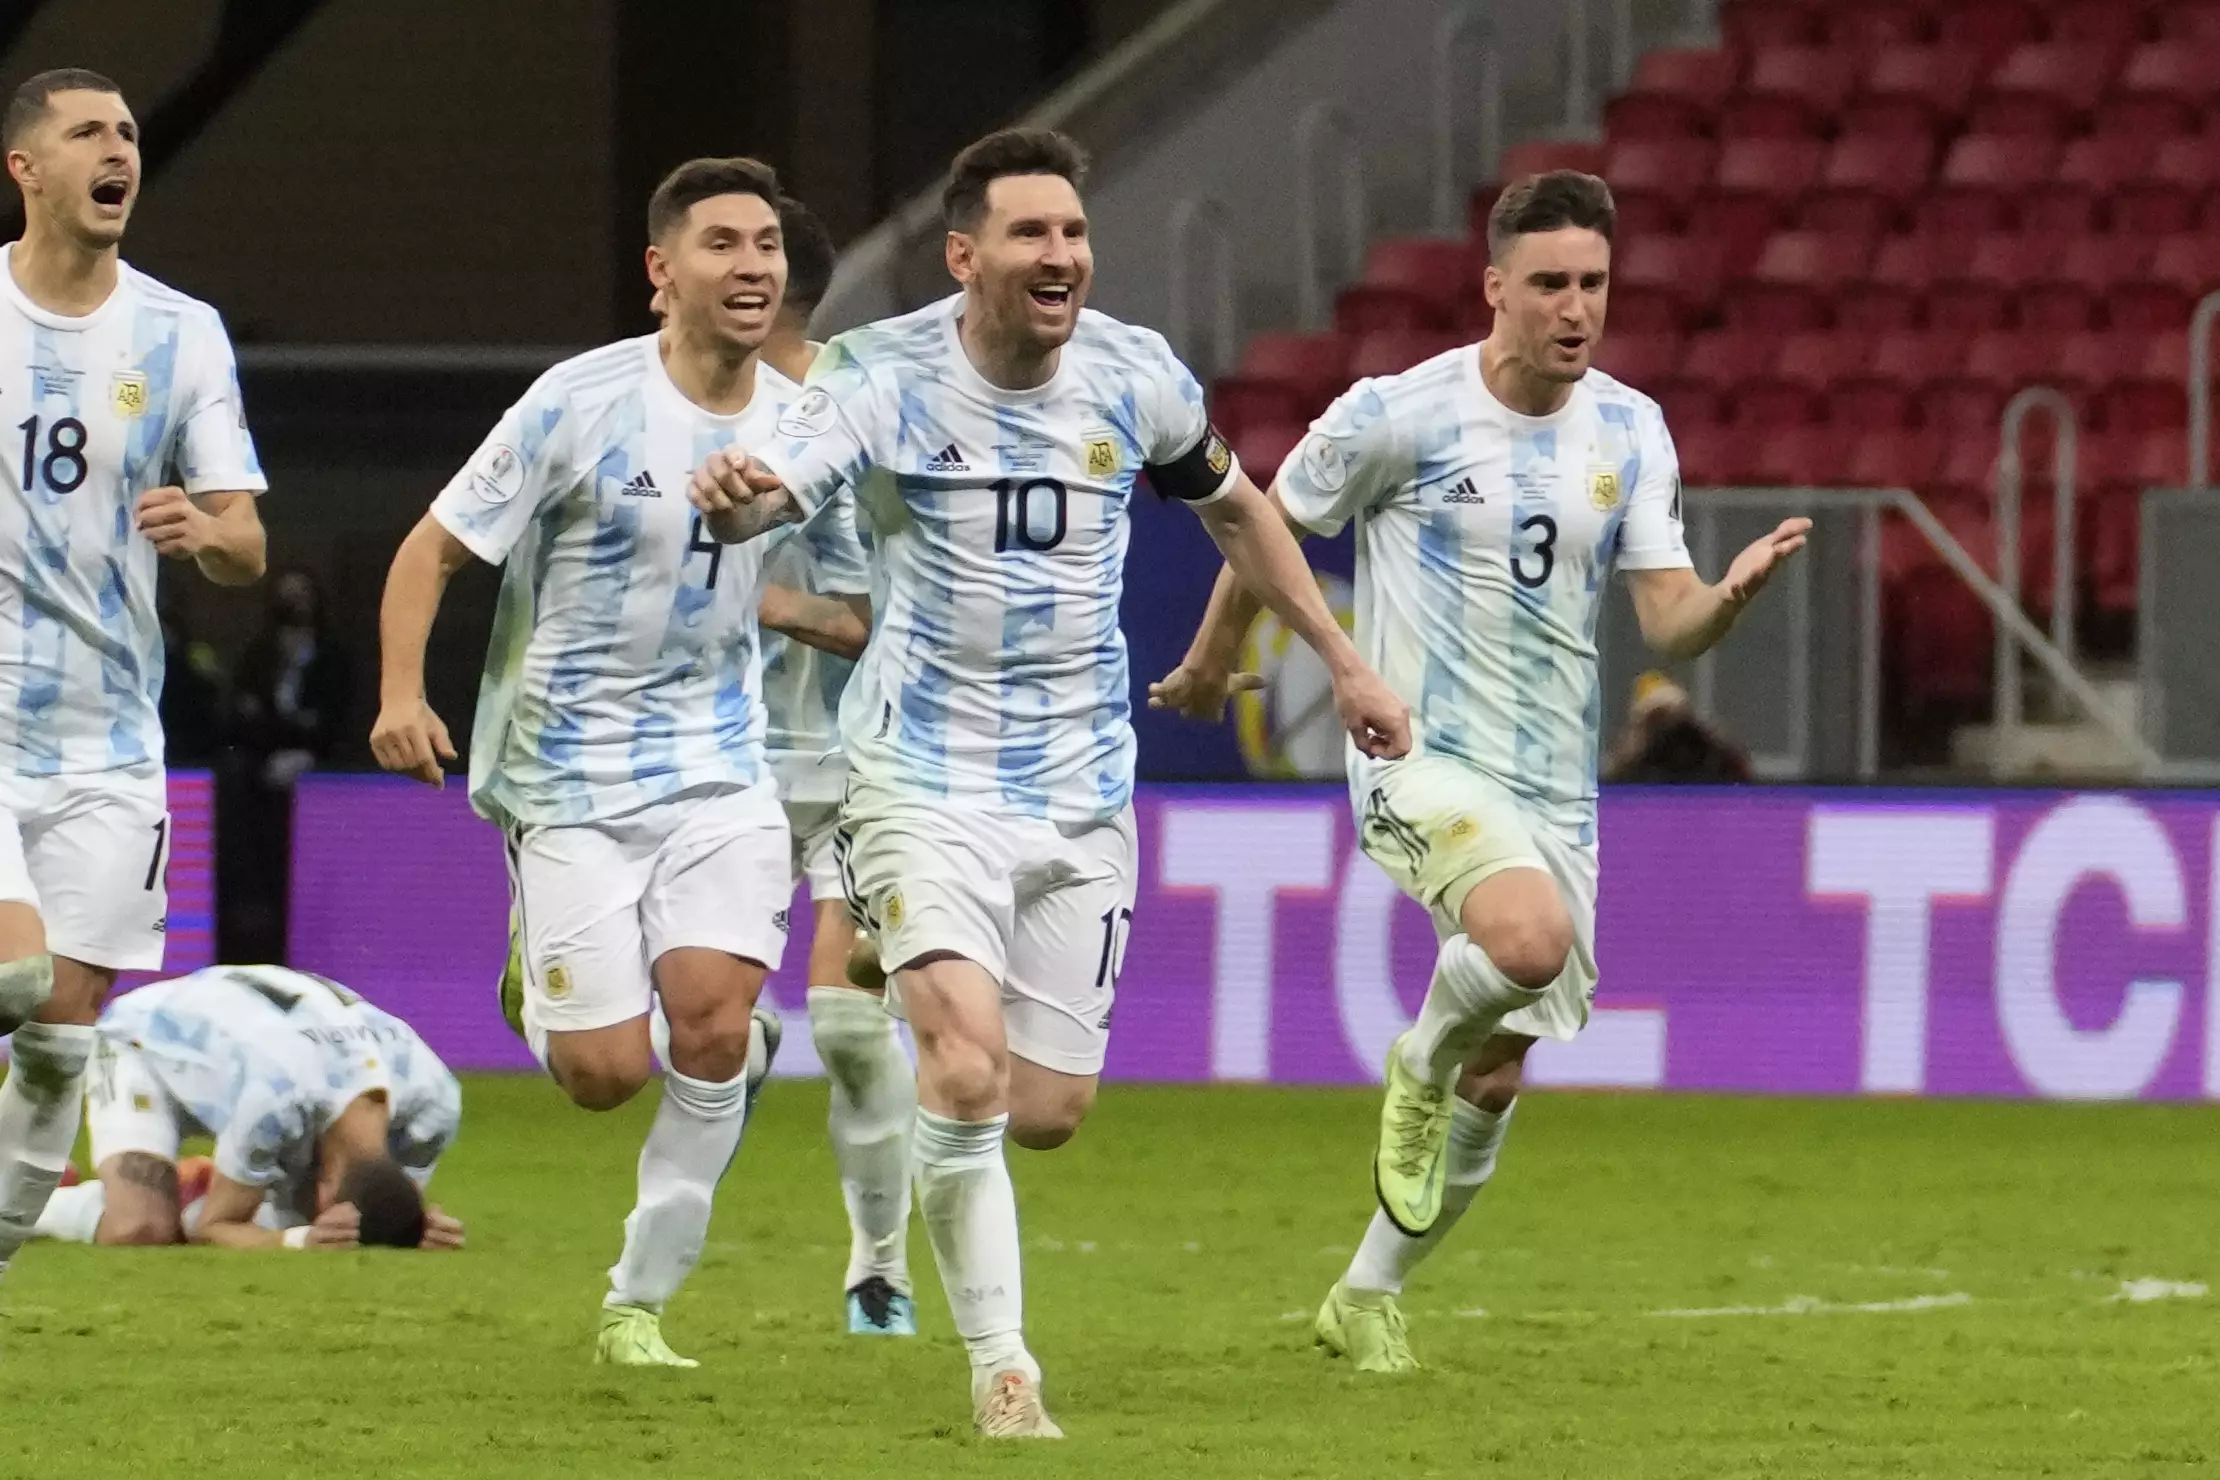 Messi will have another chance at glory with the national team. Image: PA Images